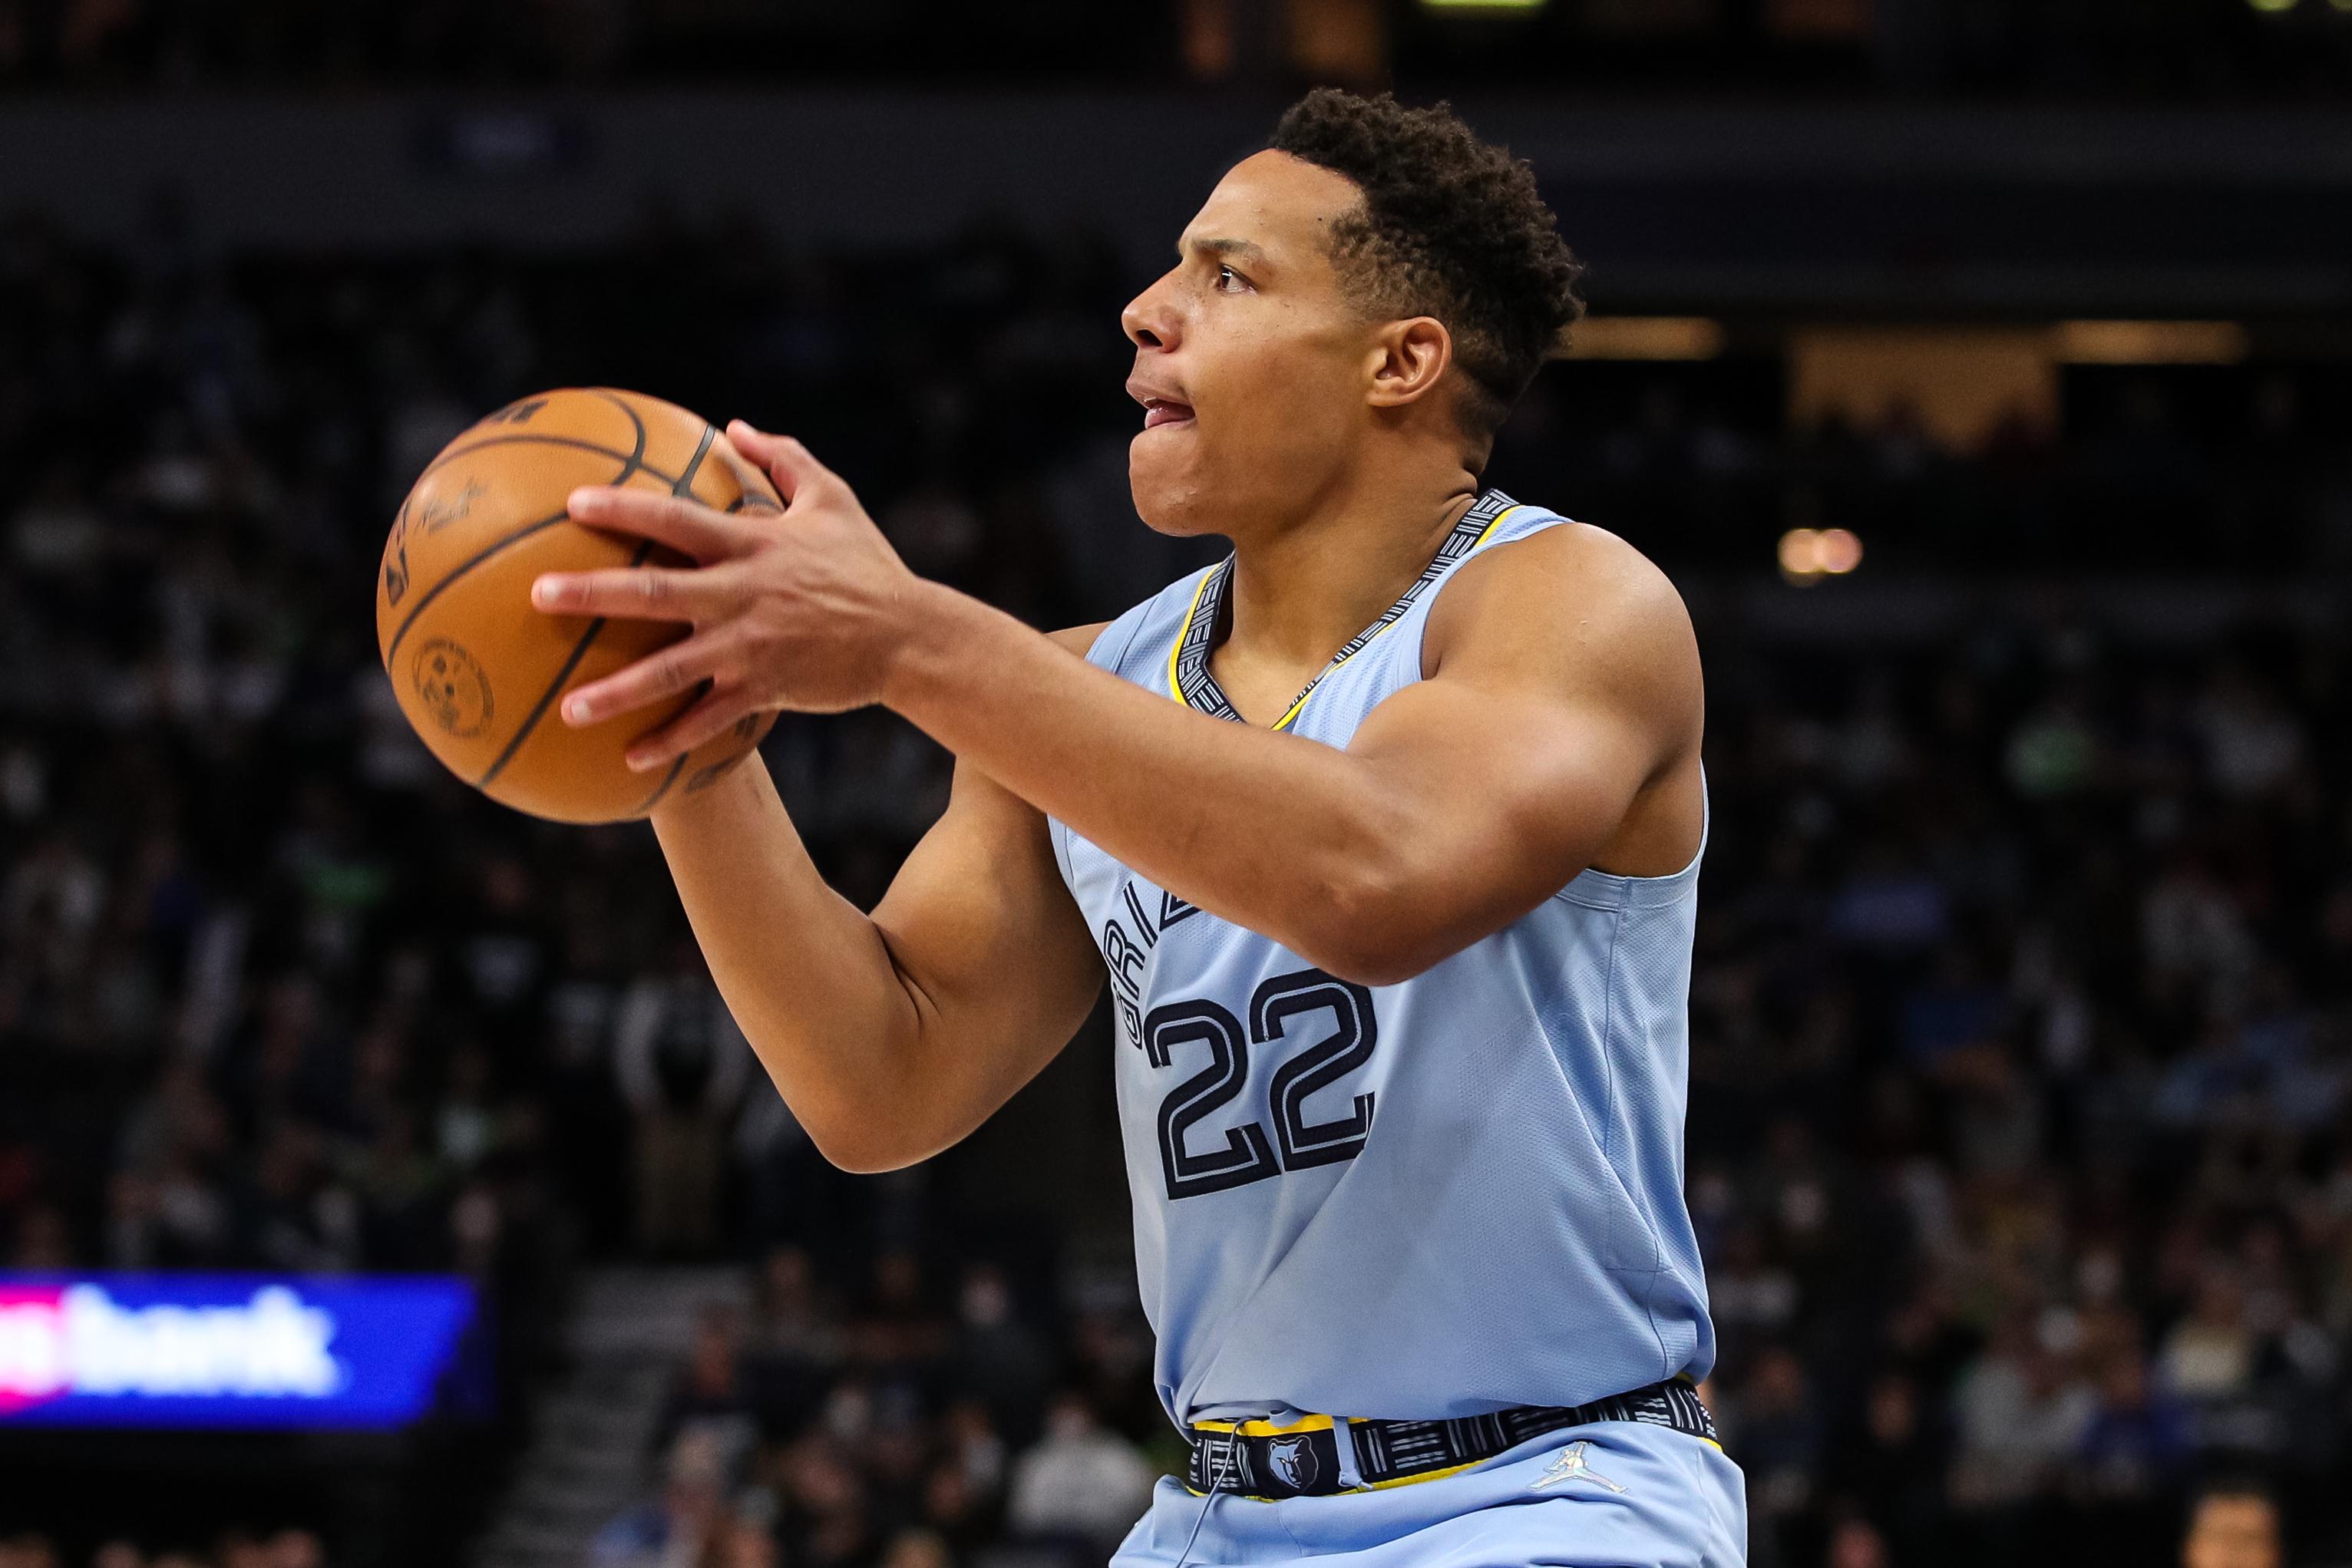 NBA Games on TV Tonight NBA on TNT Schedule and TV Info for Pelicans vs Grizzlies, Clippers vs Warriors FanDuel Research